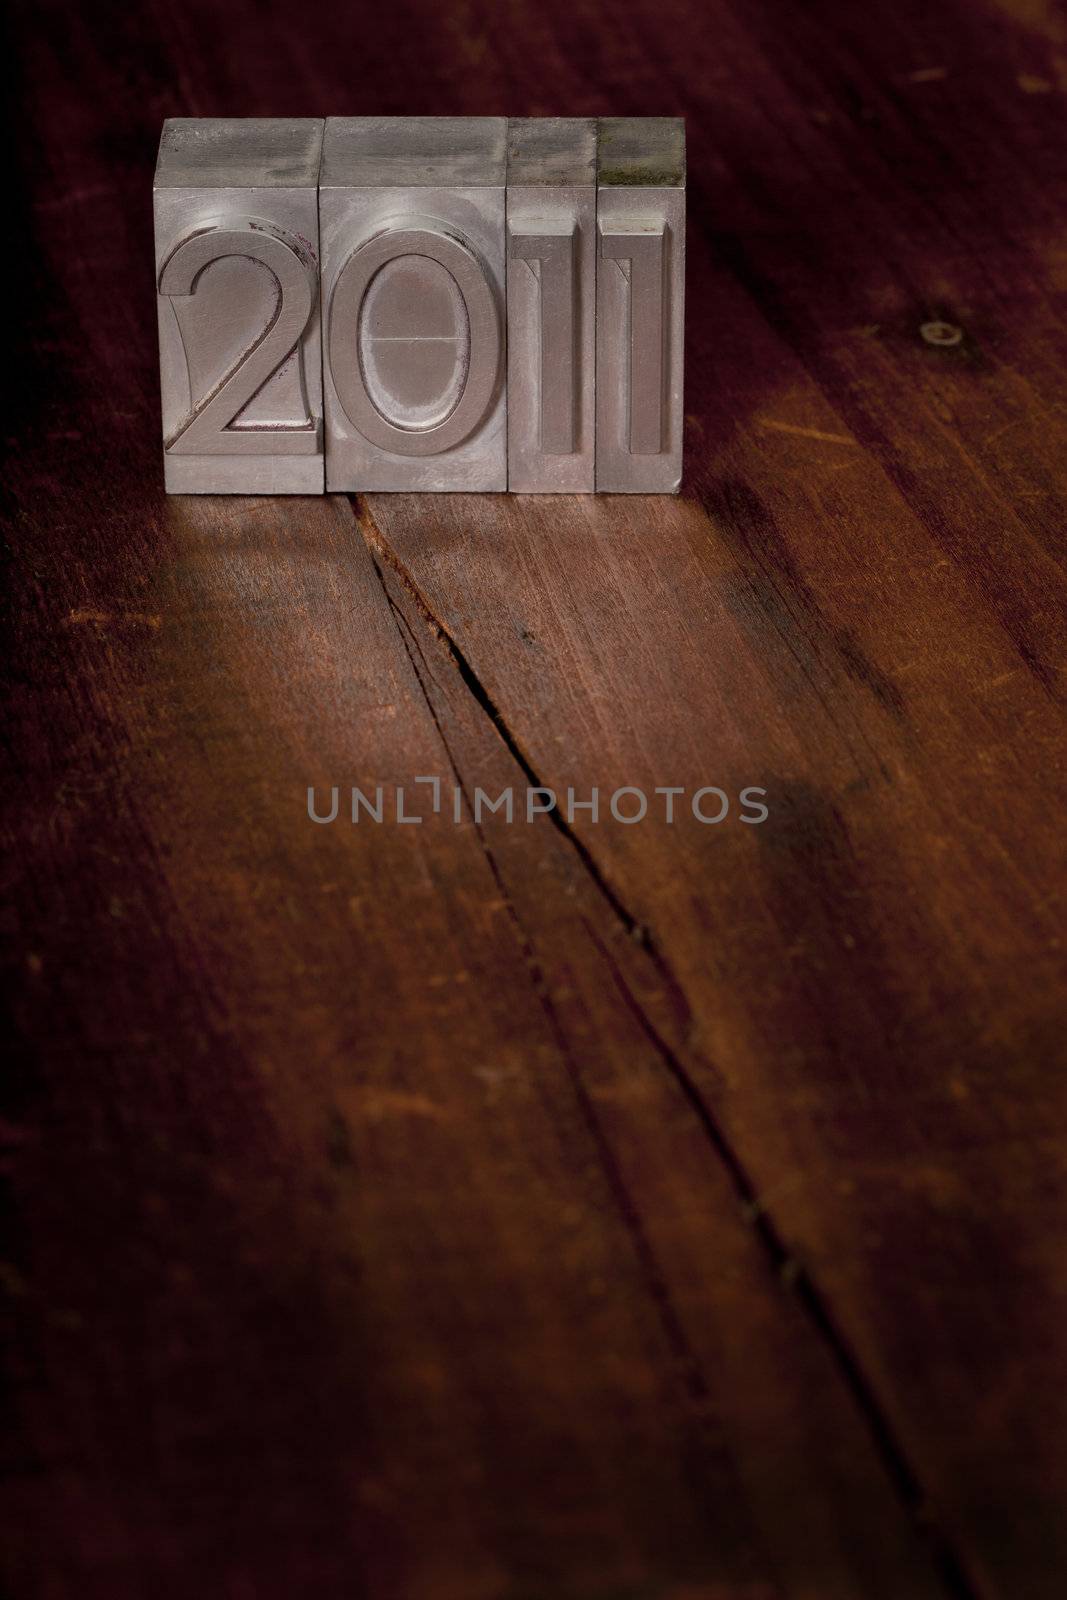 2011 New Year concept - vintage metal letterpress printing blocks on dark grunge wooden surface with scratches and cracks